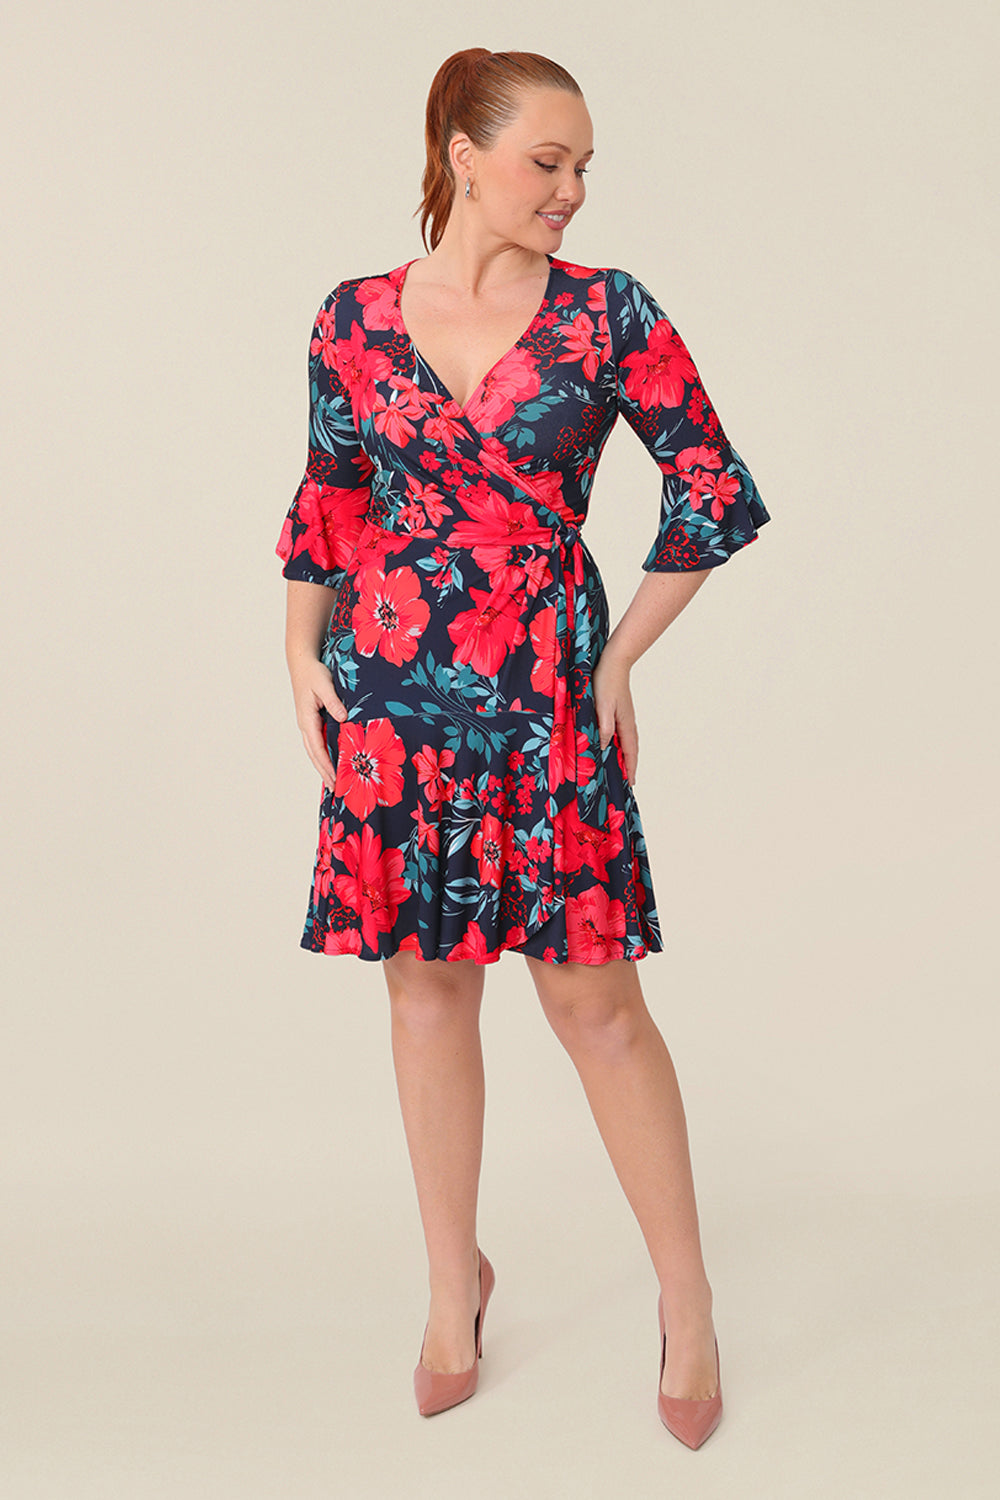 A size 12 curvy woman wears a reversible wrap dress with 3/4 fluted sleeves. Featuring a mini-length skirt with ruffle hem and 3/4 length fluted sleeves, this floral printed jersey dress is has a v-neckline and wears well as an everyday dress. 